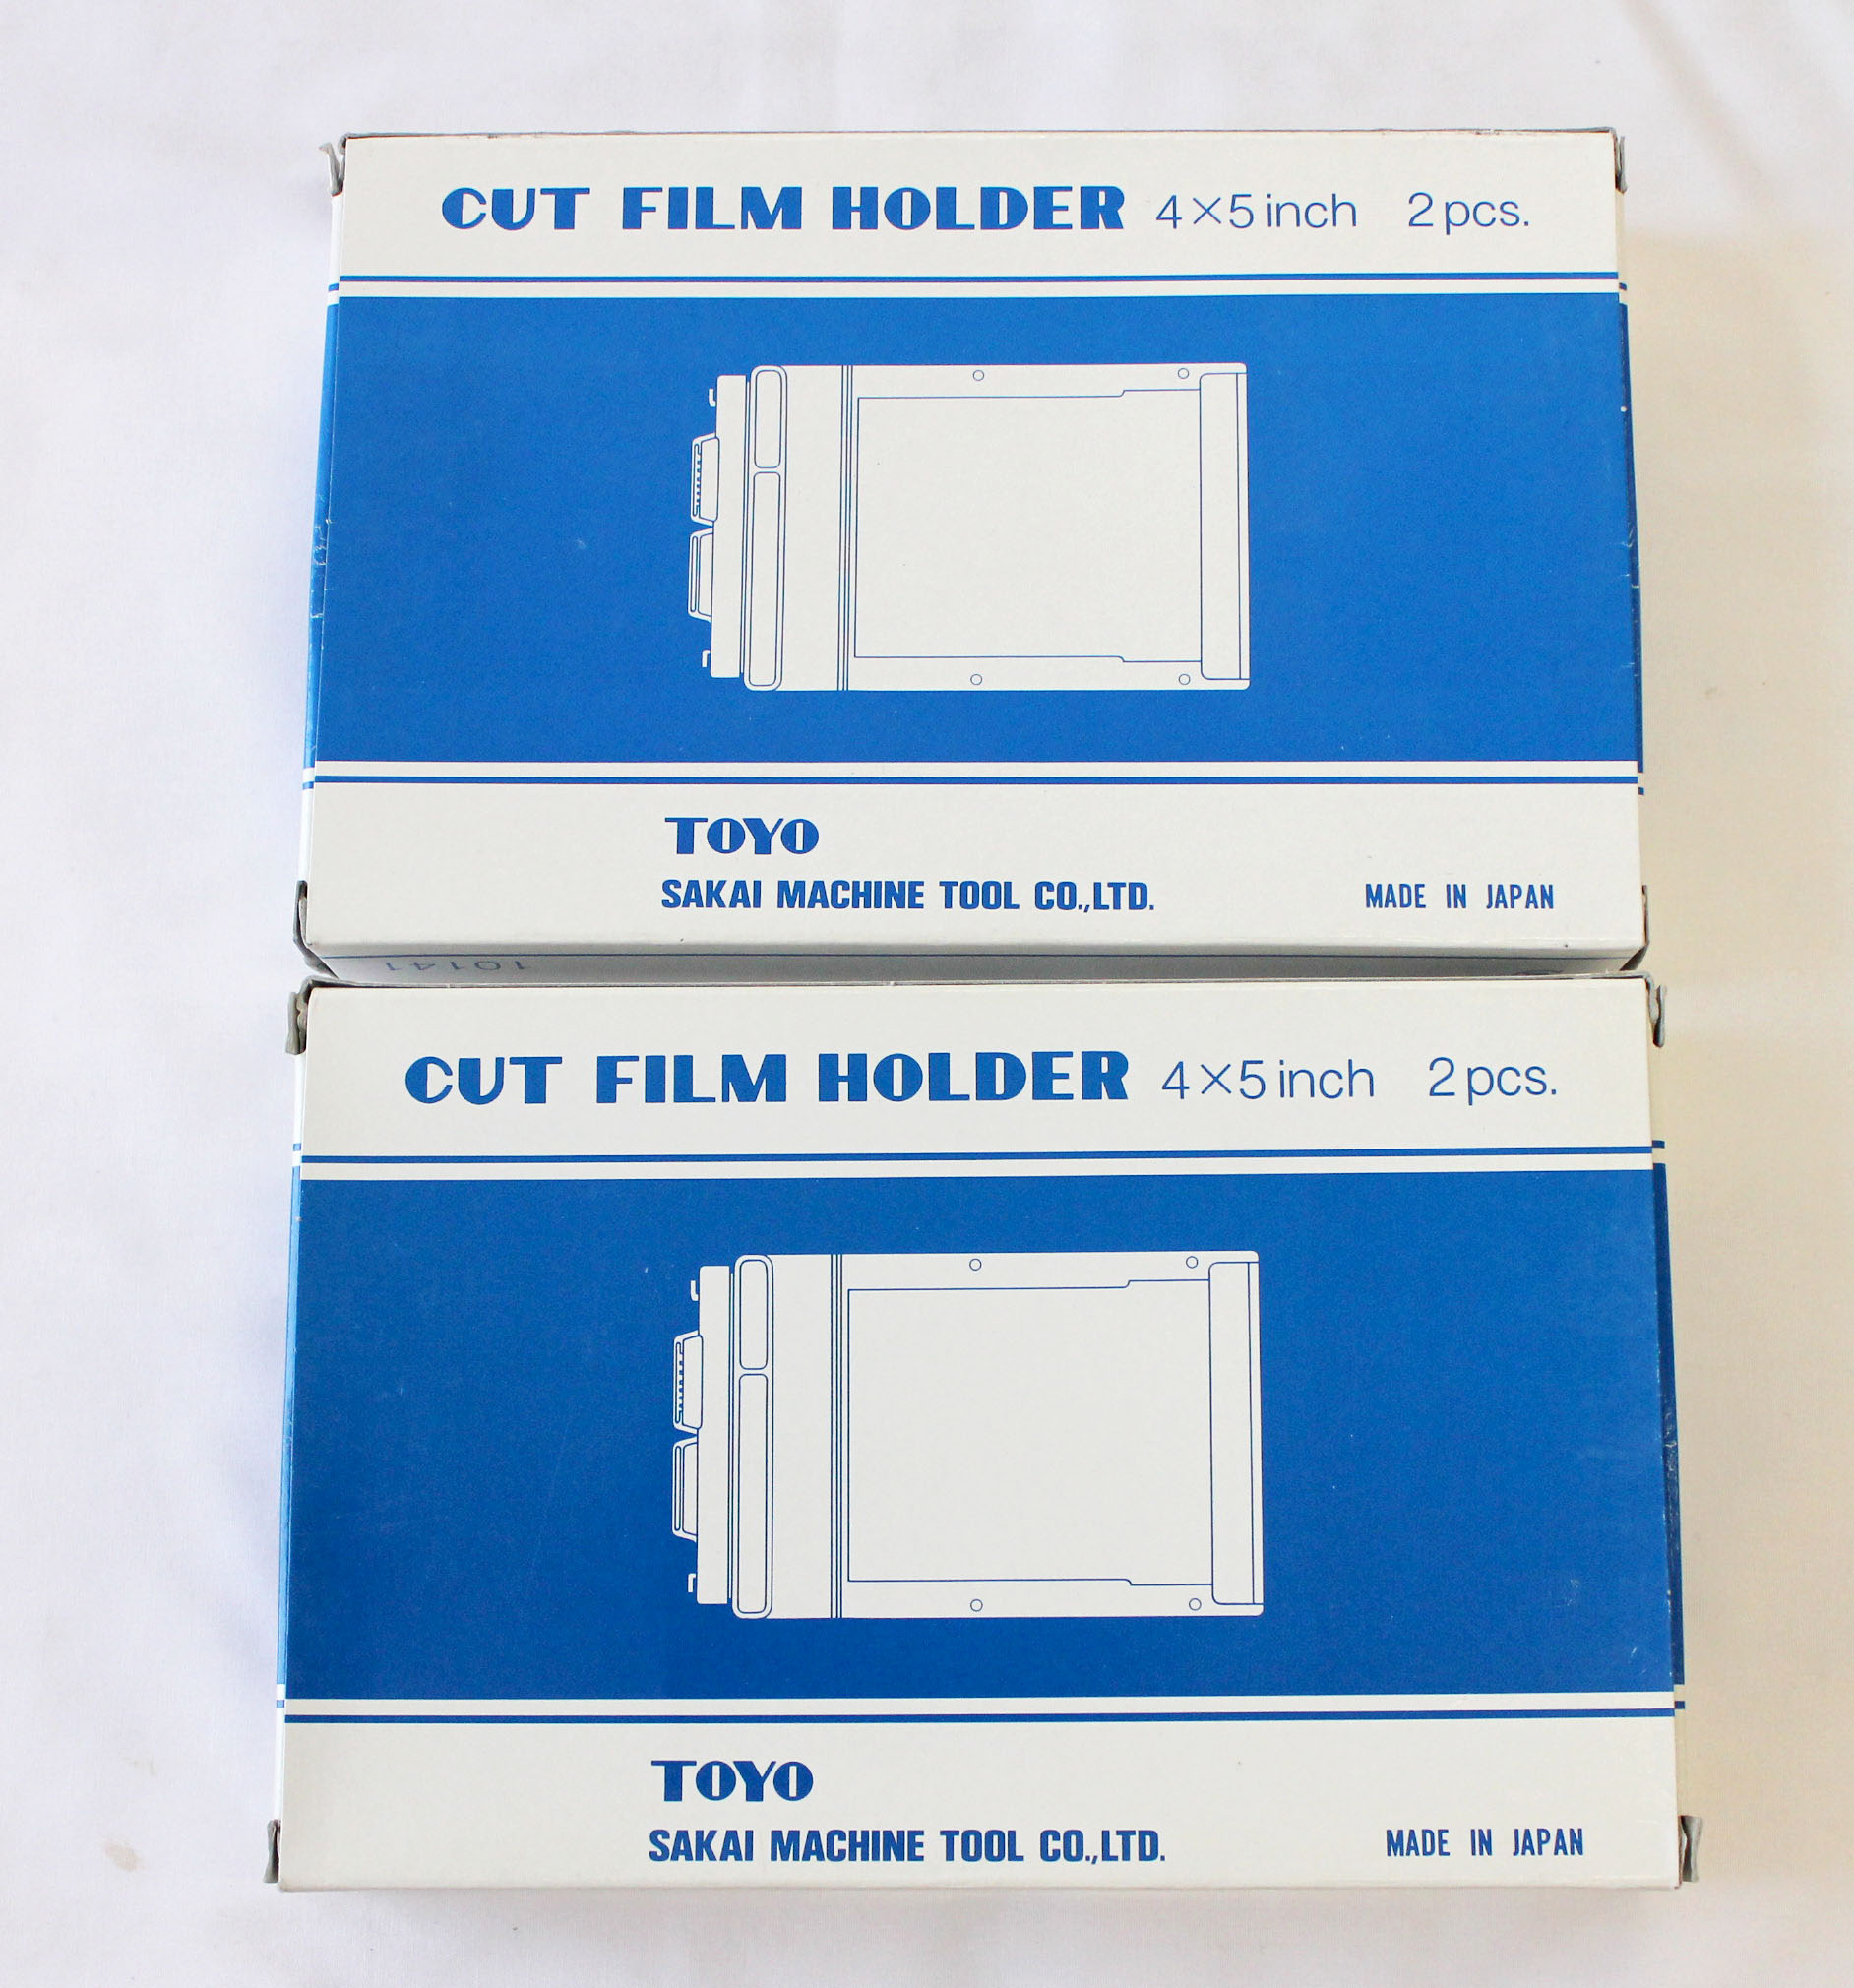 Japan Used Camera Shop | [Unused in Box] Toyo 4x5 inch Cut Film Holder 4pcs (2 boxes) from Japan